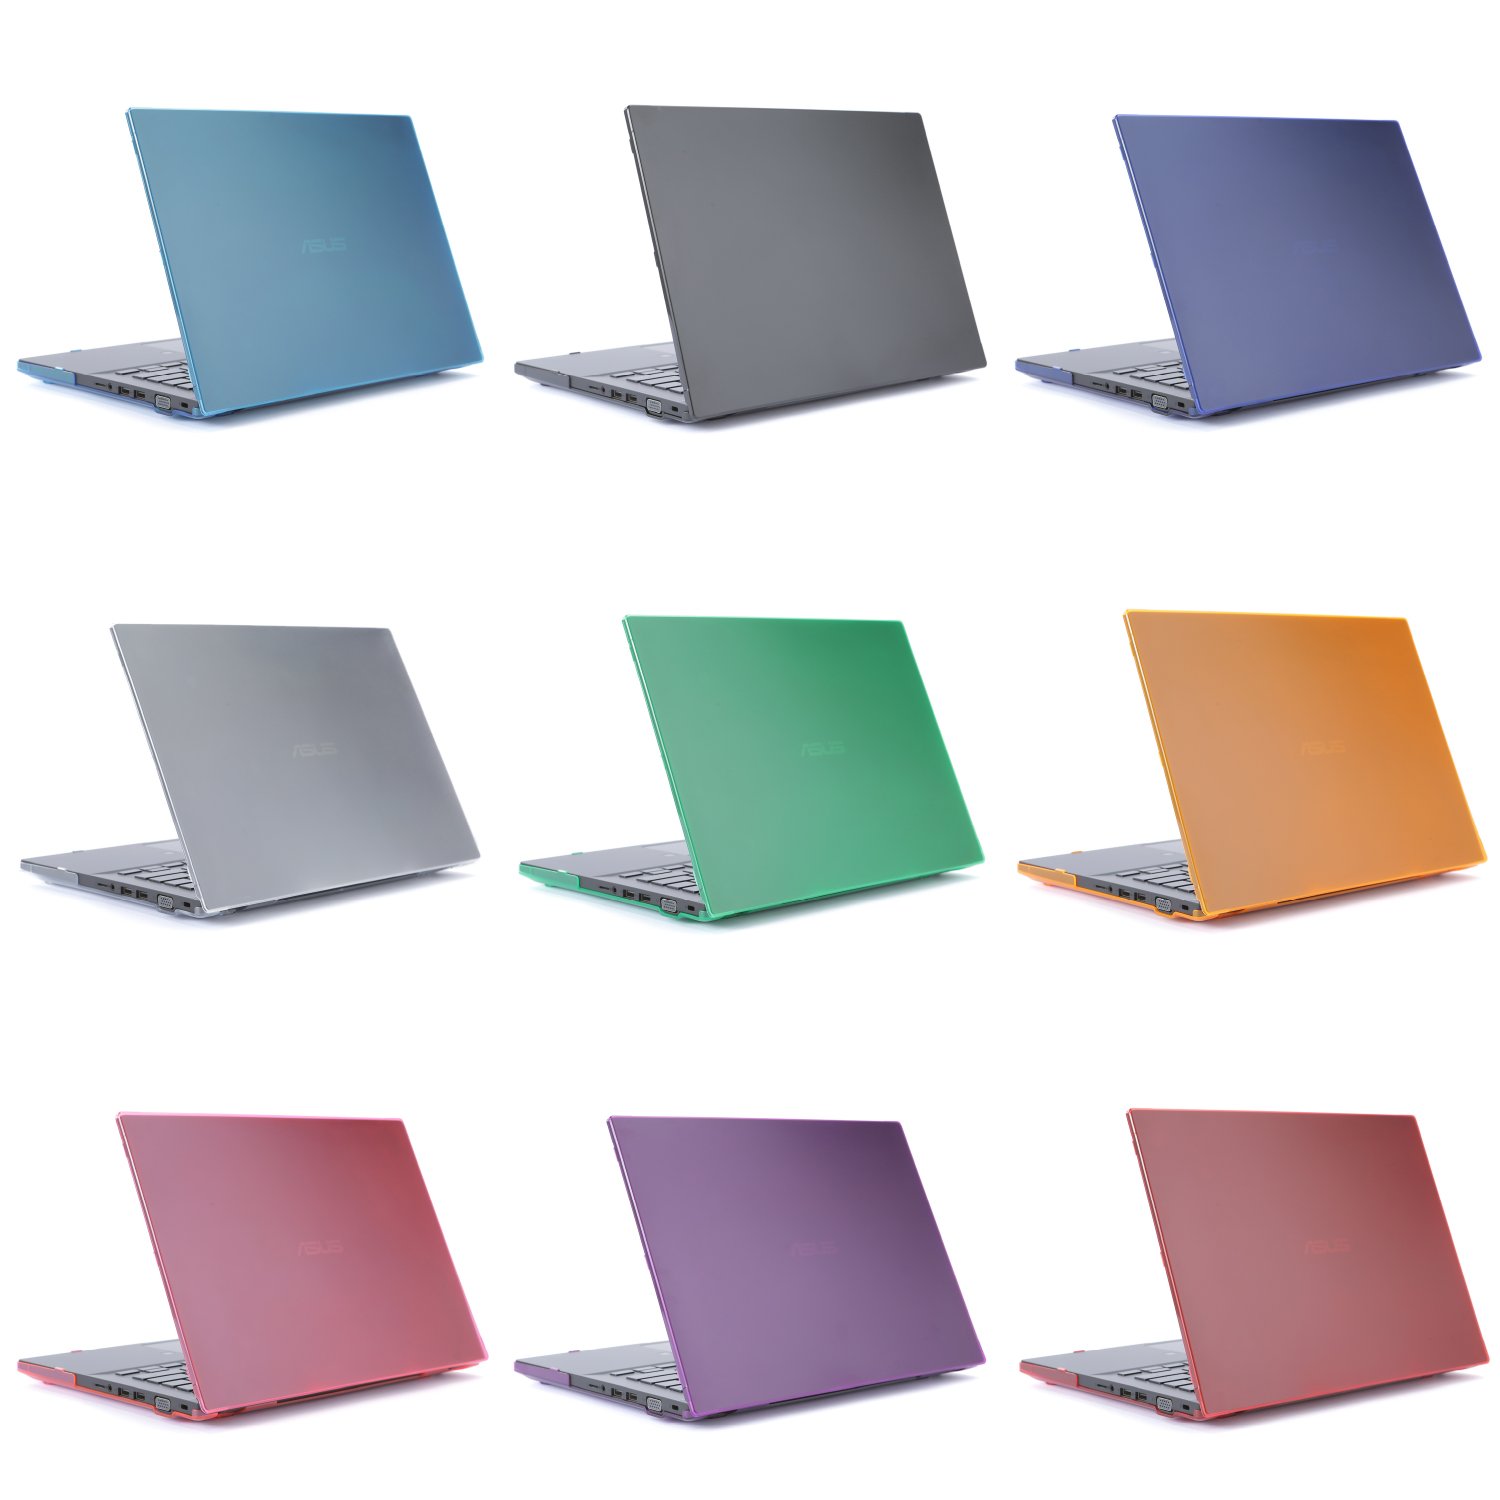 mCover Hard Shell case for 14-inch ASUS ExpertBook P2451 series